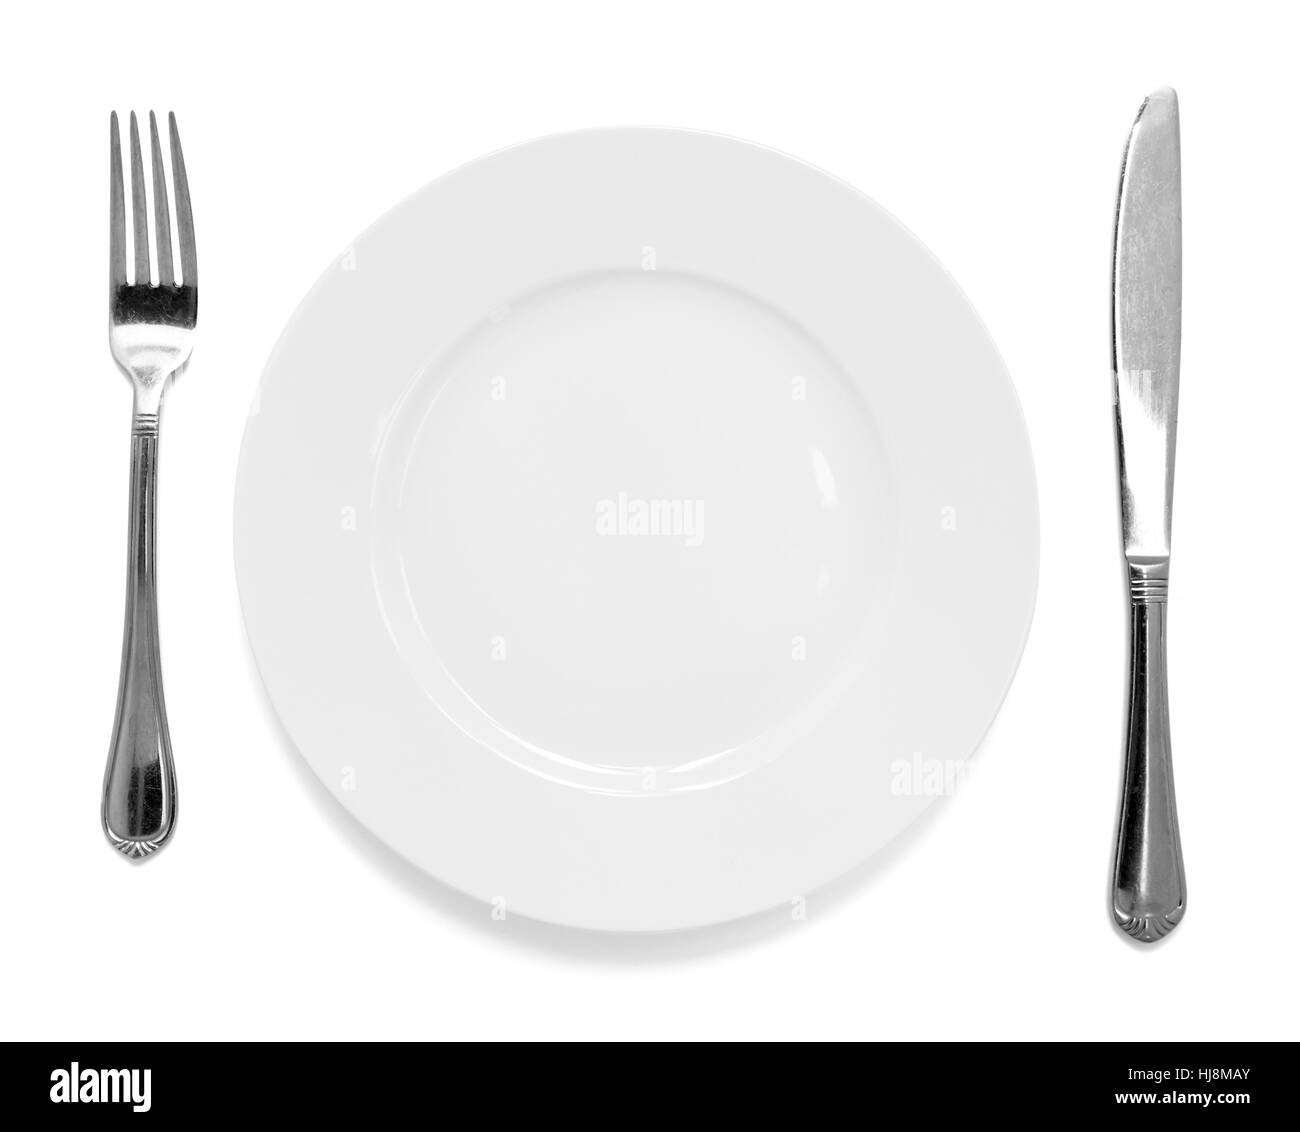 isolated, plate, fork, food, dish, meal, empty, eating, eat, eats, white, arm, Stock Photo